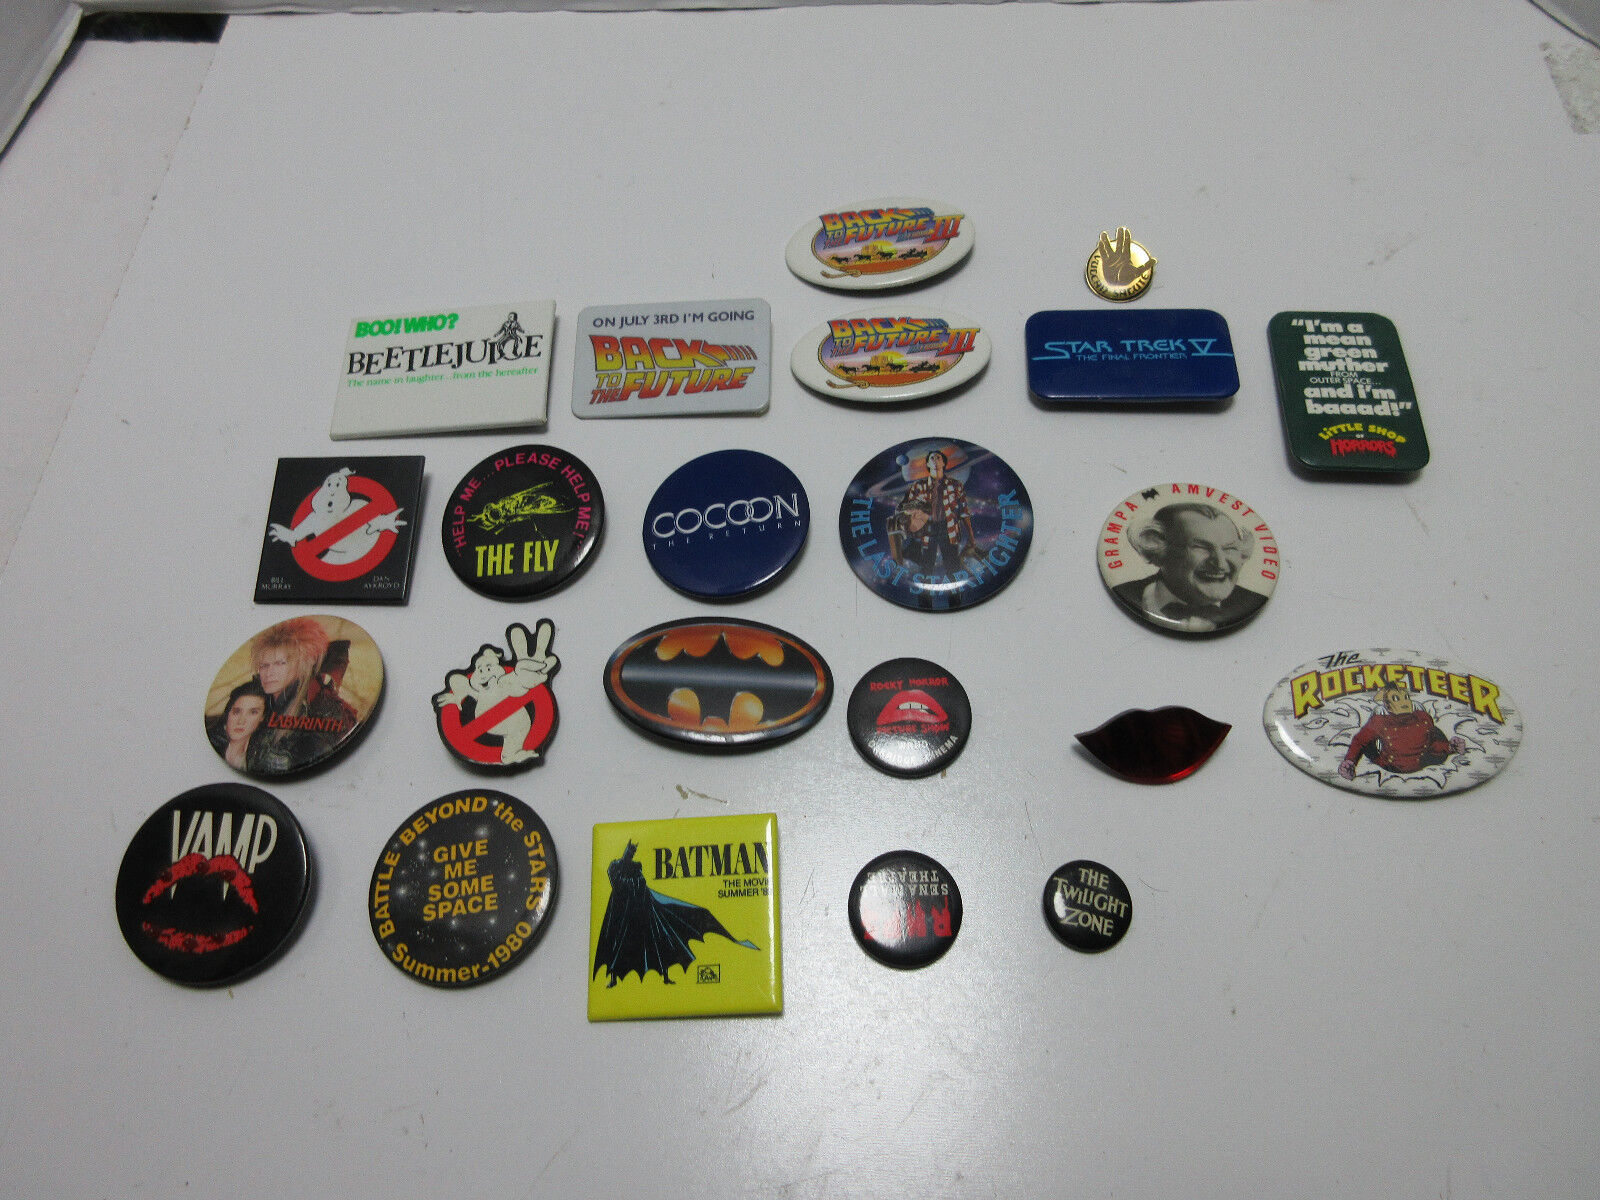 LARGE MOVIE PINBACK LOT - BATMAN, BACK TO THE FUTURE, BEETLEJUICE, THE FLY, VAMP